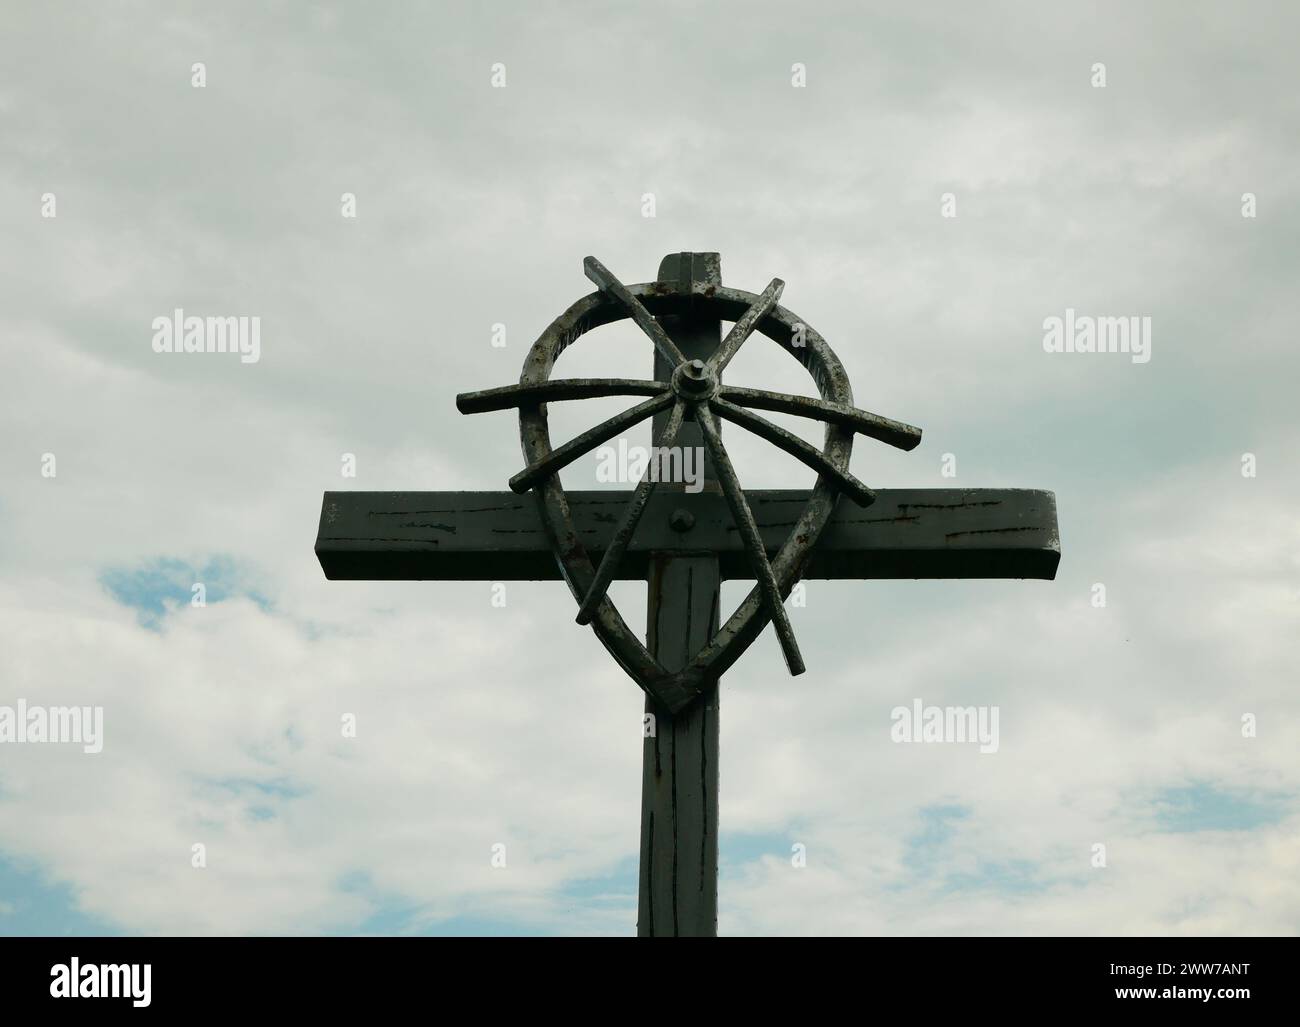 Concentration camp cross memorial people tourist crucifix labour Gypsy replica barrack, monument wooden bathroom washroom memorial site view interior Stock Photo